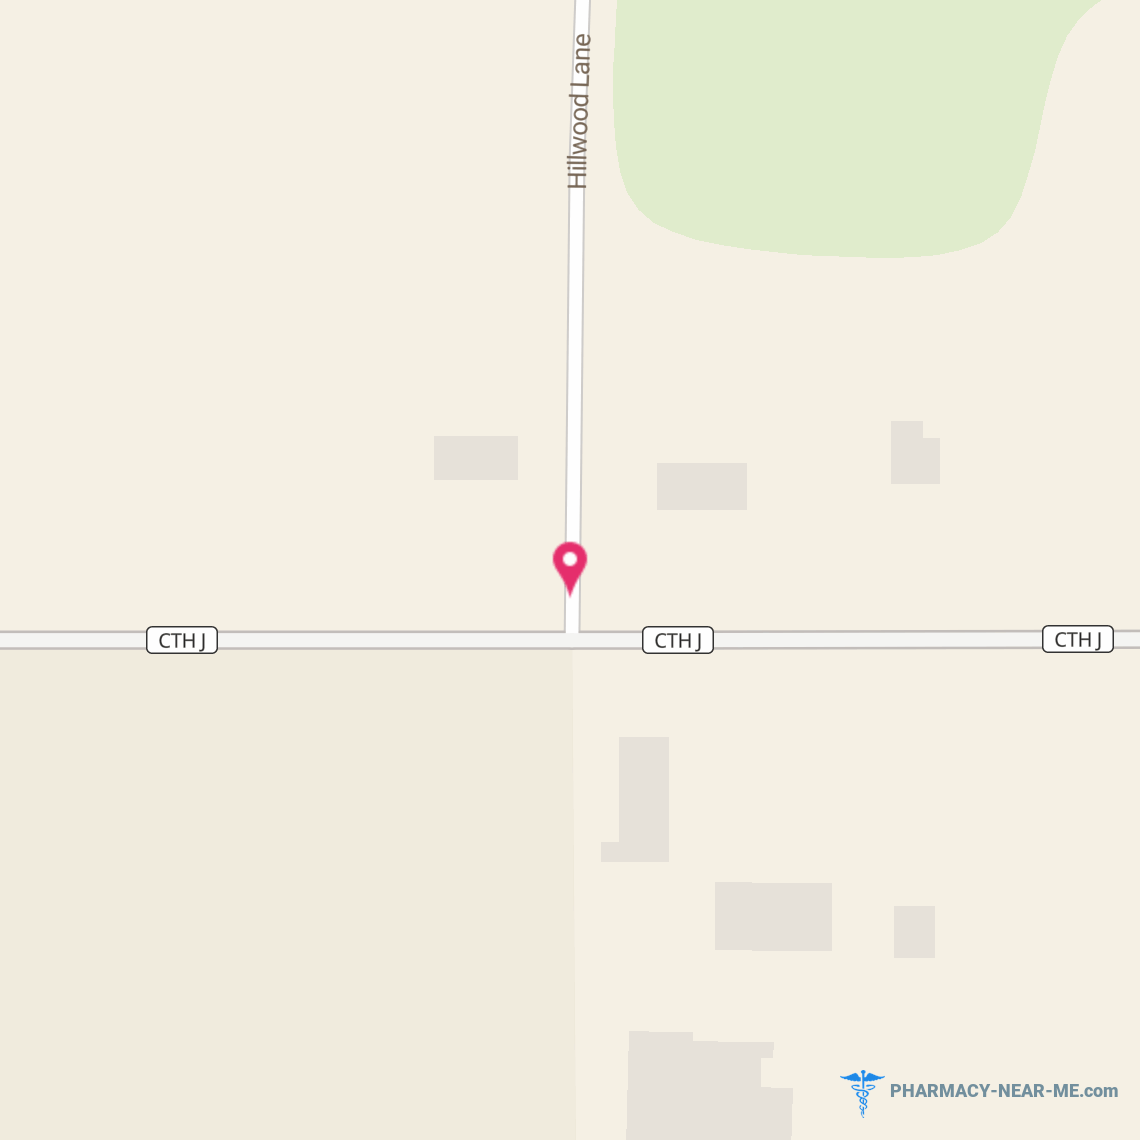 GUNDERSEN MOUNDVIEW HOSPITAL AND CLINICS, INC. - Pharmacy Hours, Phone, Reviews & Information: 402 West Lake Street, Friendship, Wisconsin 53934, United States